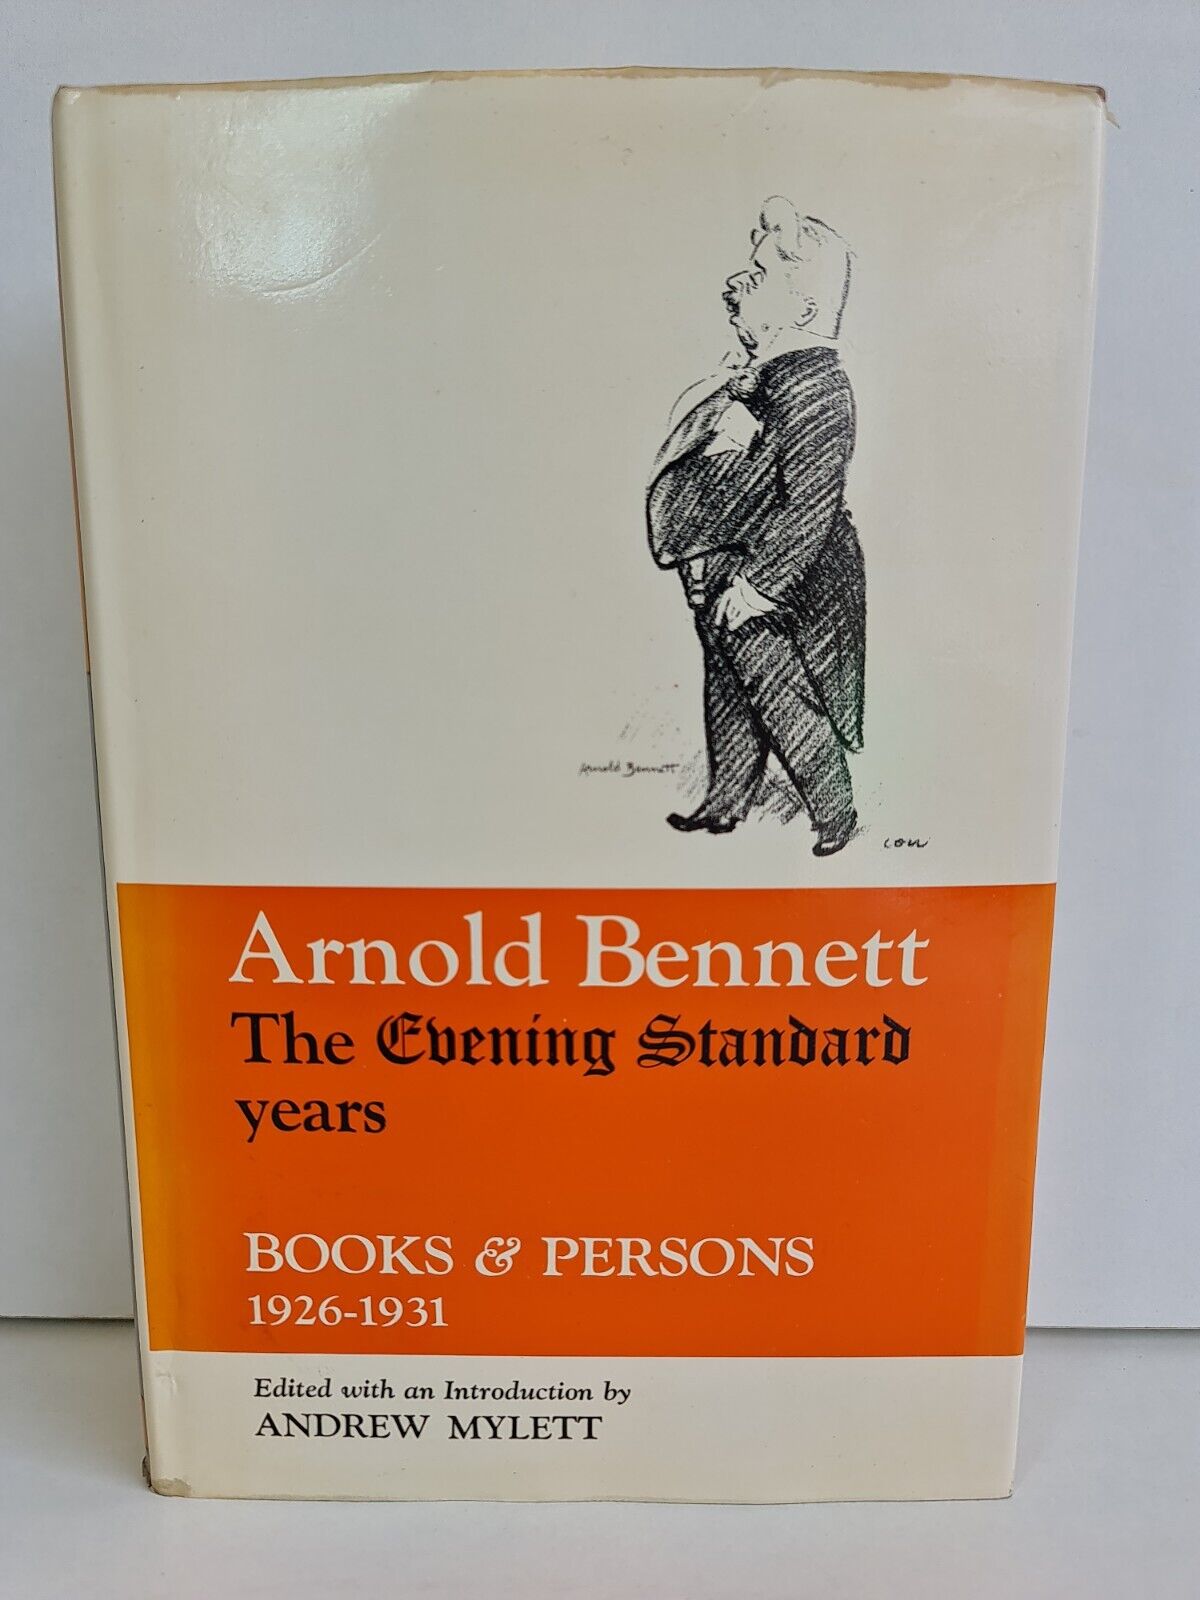 Evening Standard Years: Books & Persons 1926-1931 by Arnold Bennett (1974)